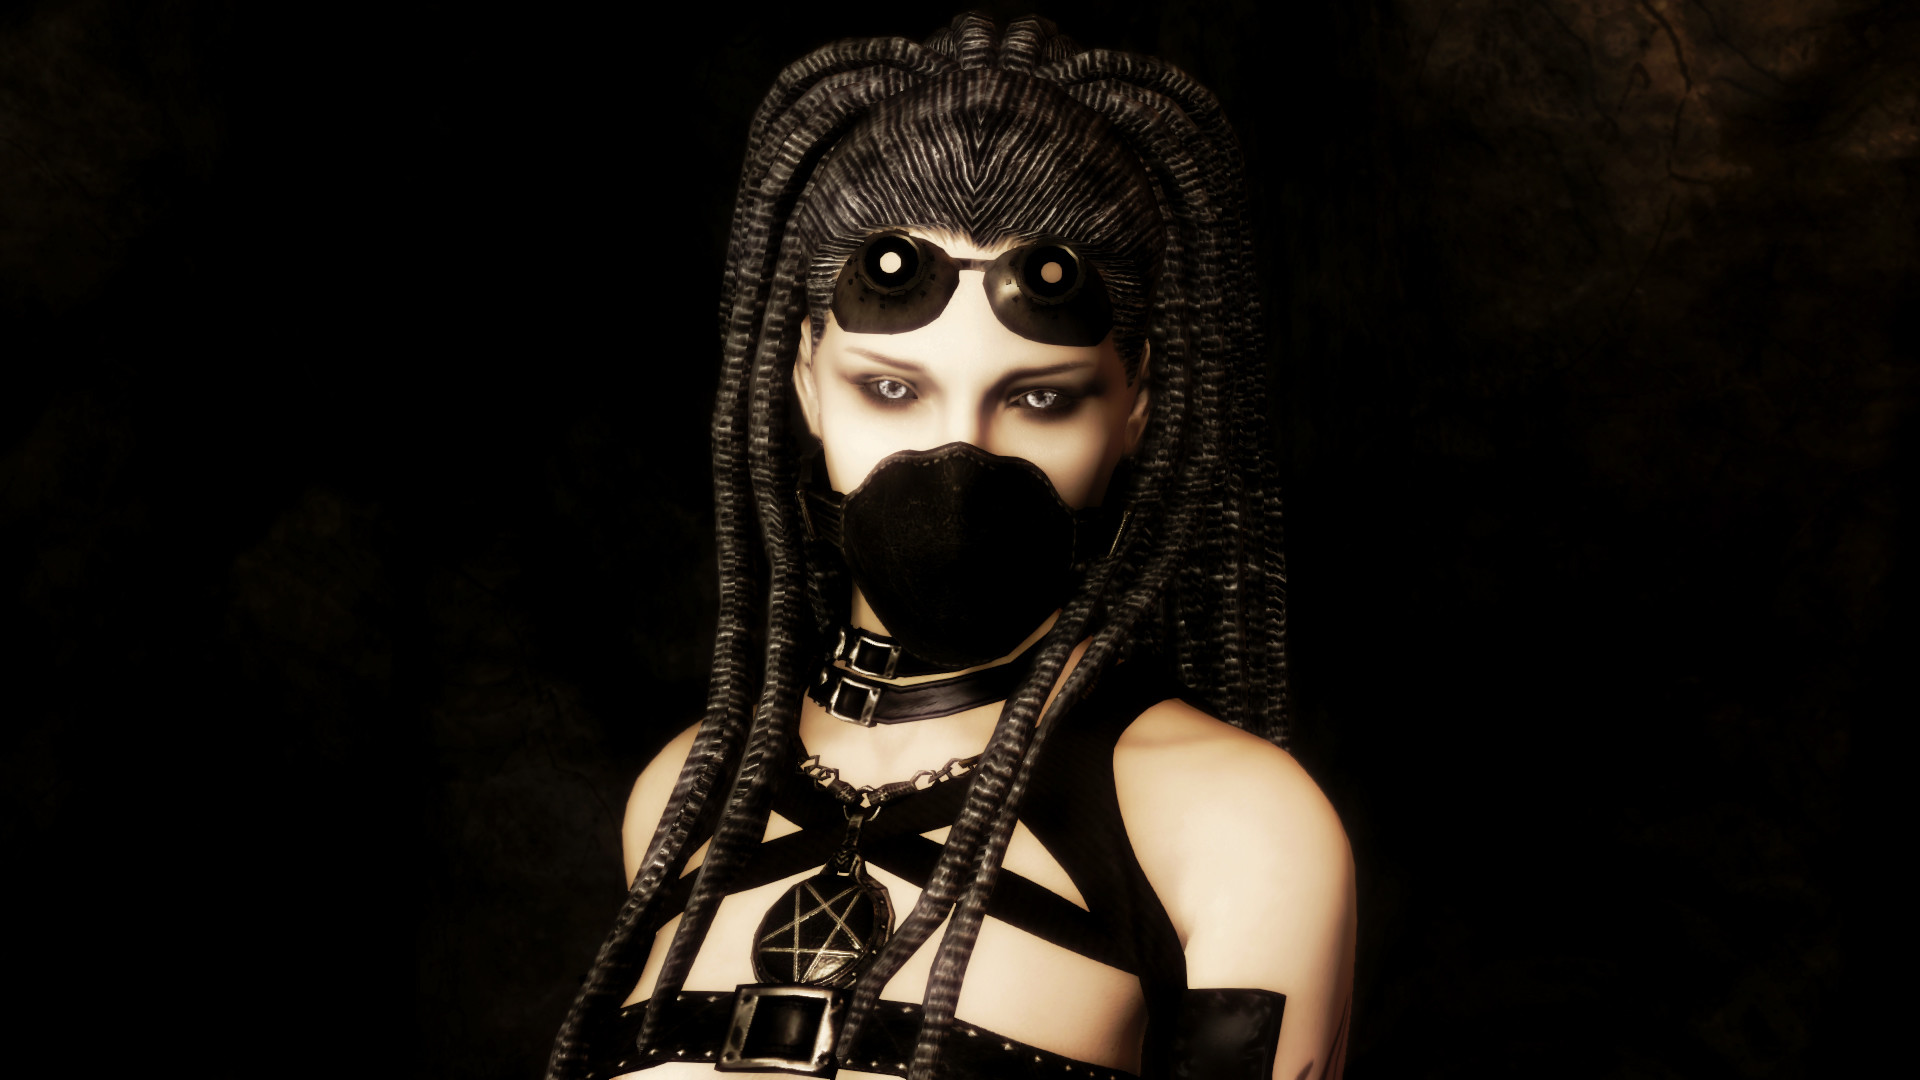 Cyber Goth Wallpaper (77+ images)